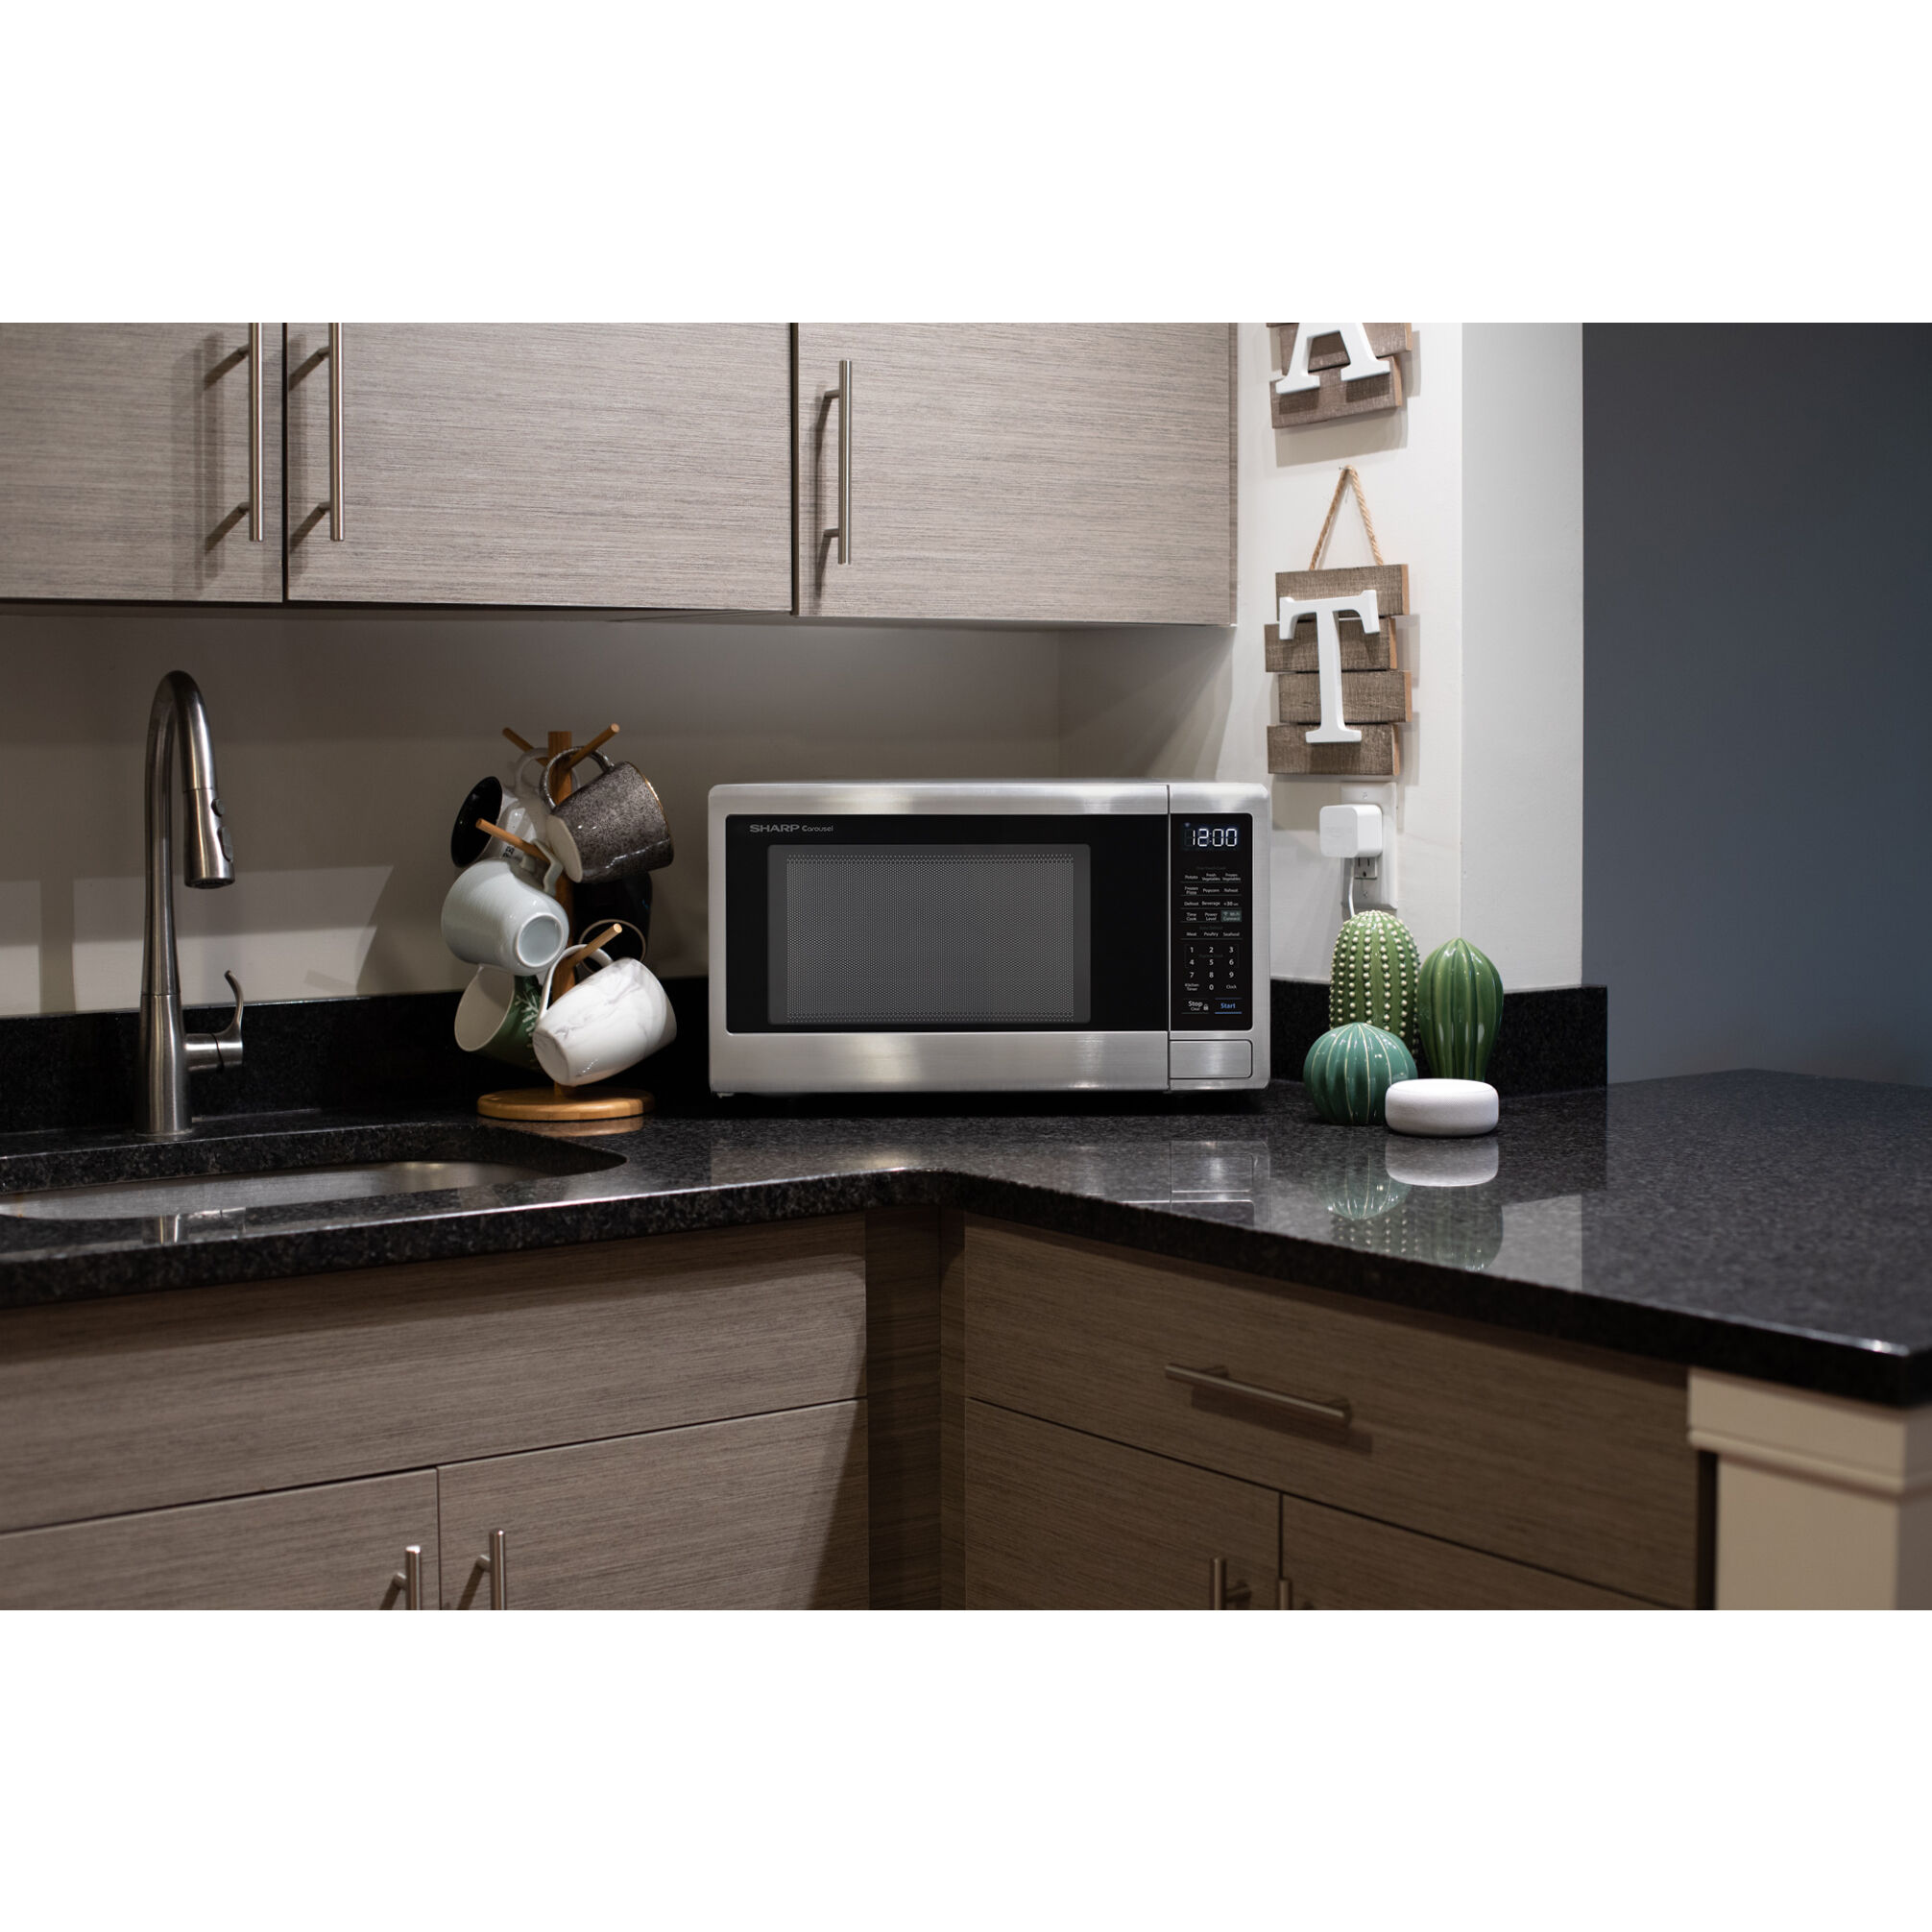 Sharp 1.1-Cu. Ft. Countertop Microwave with Alexa-Enabled Controls, Stainless Steel - image 4 of 8